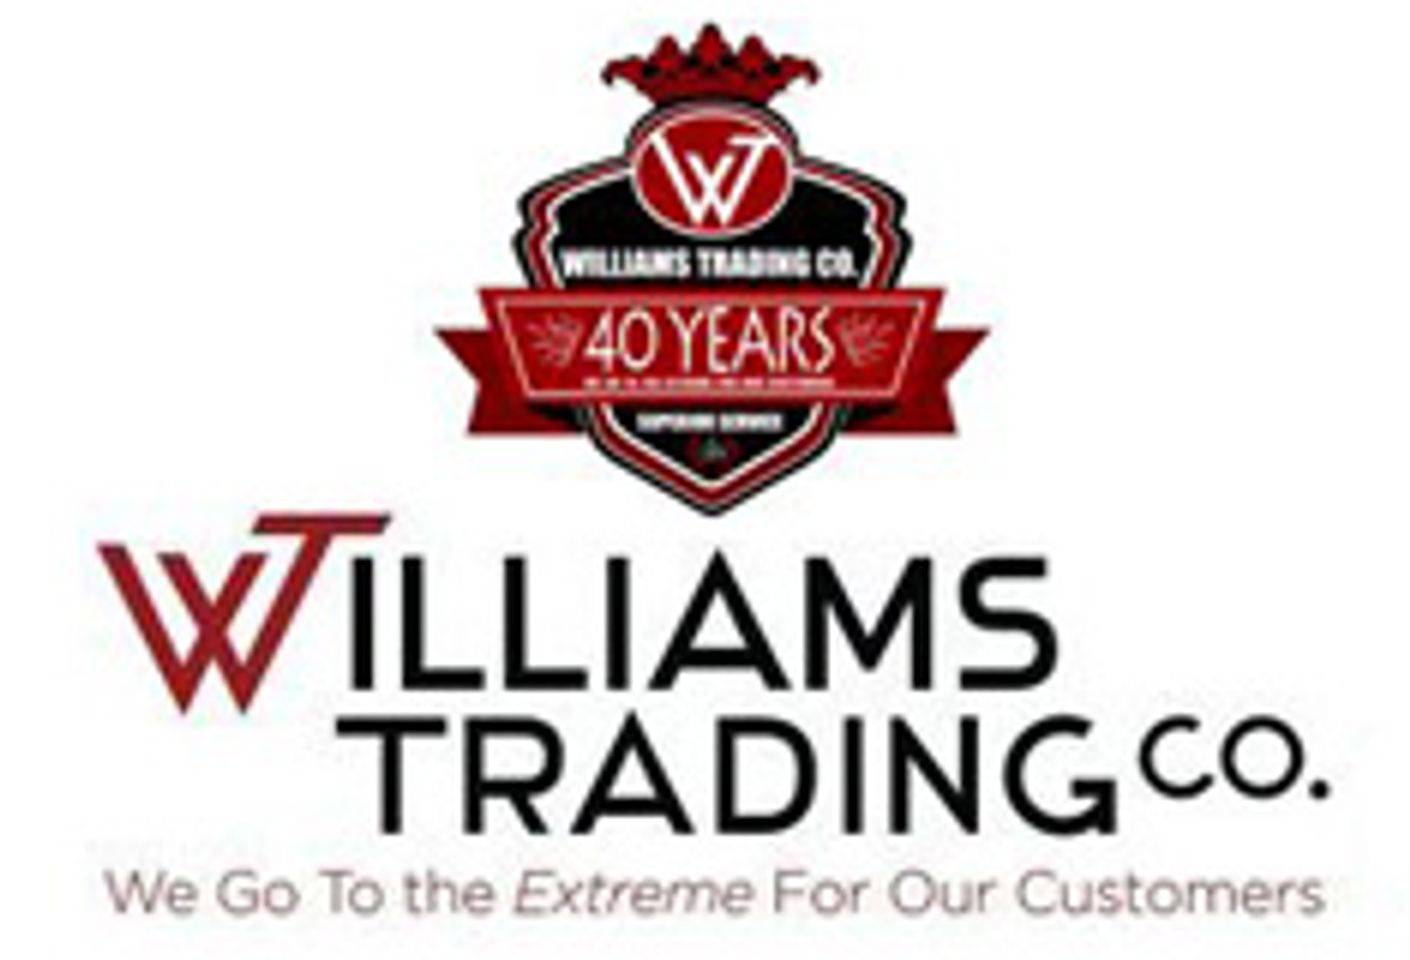 Williams Trading Offers Alexander Institute DVDs to Retailers Purchasing New Sportsheets Lines